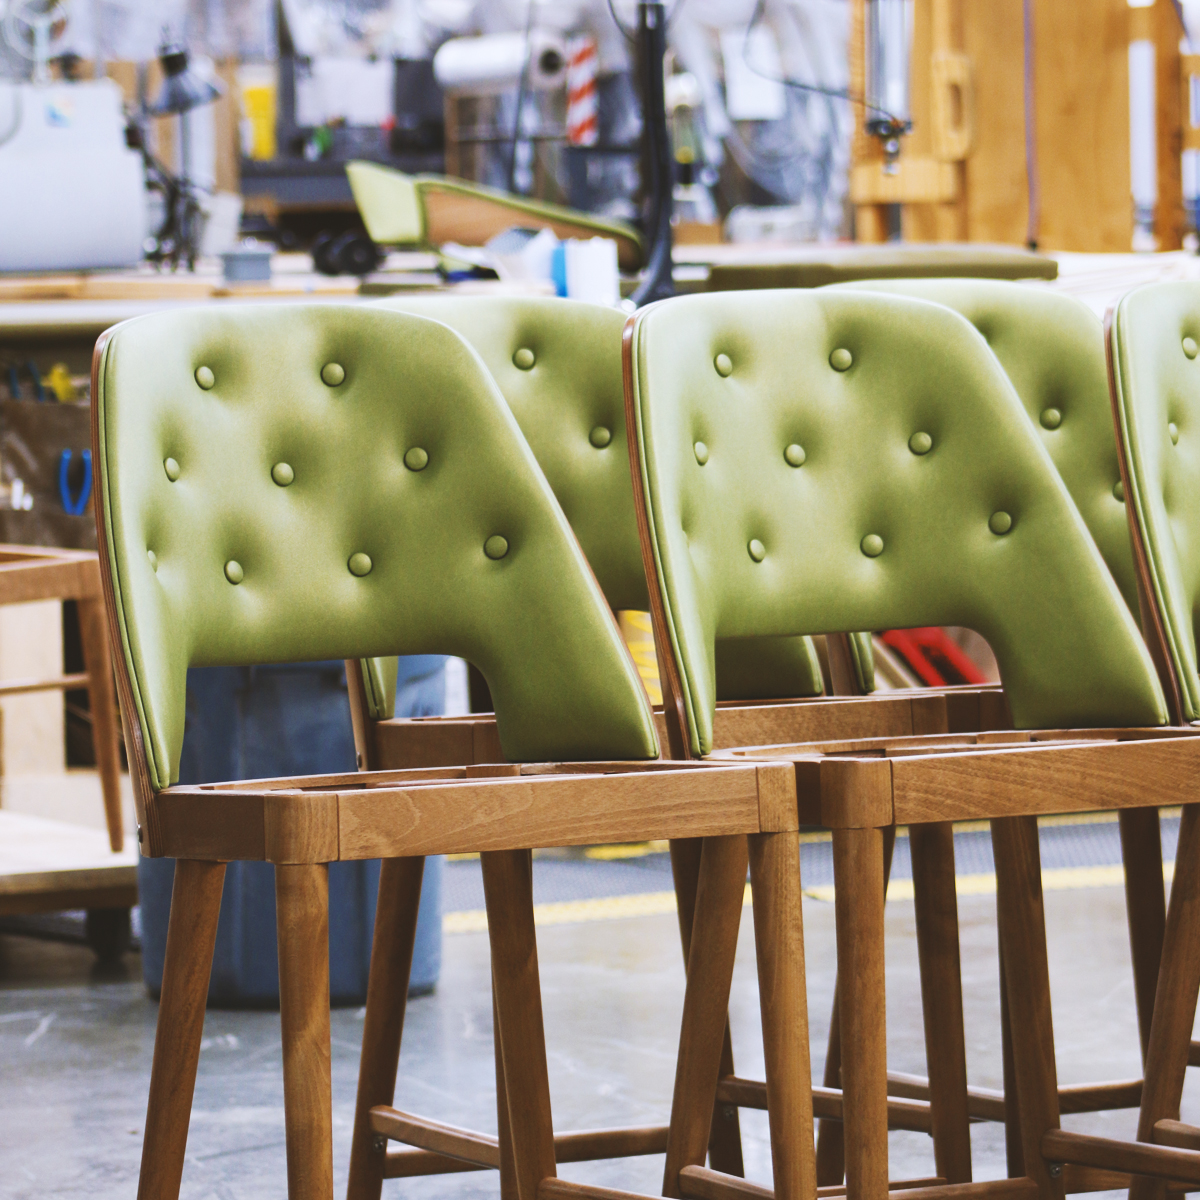 Happy Friday!

These No. 53 barstools might be waiting for their seats but they are looking forward to the weekend and many weekends to come!

#furniture #modernfurniture #indoorfurniture #commercialfurniture #hospitalityfurniture #craftsmanship #interiordesign #upholstery